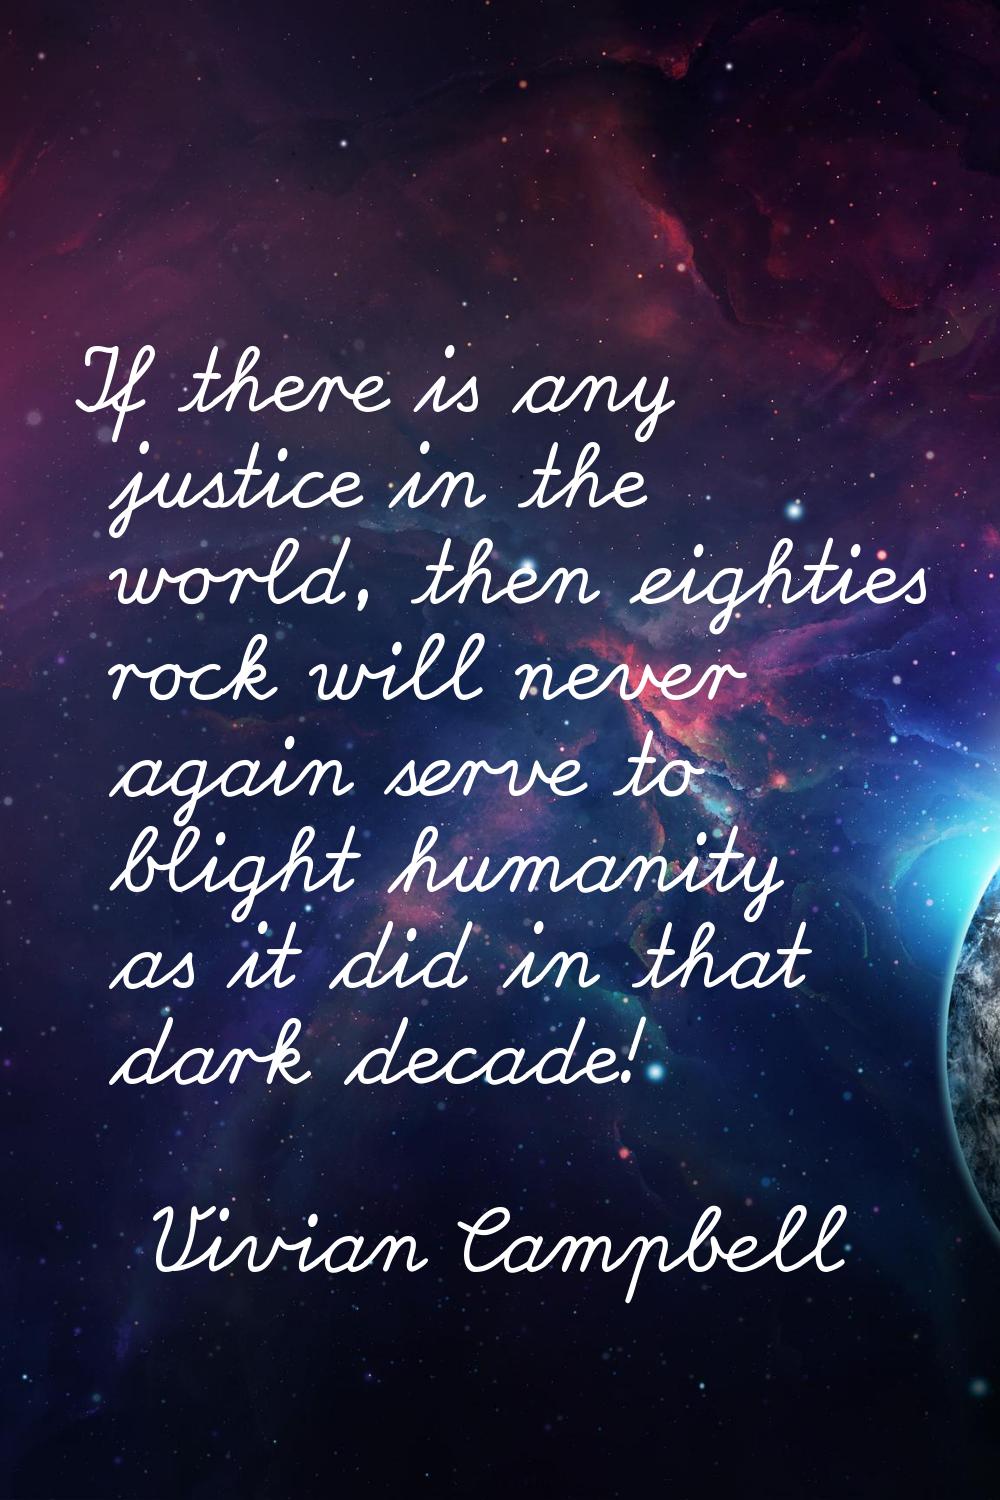 If there is any justice in the world, then eighties rock will never again serve to blight humanity 